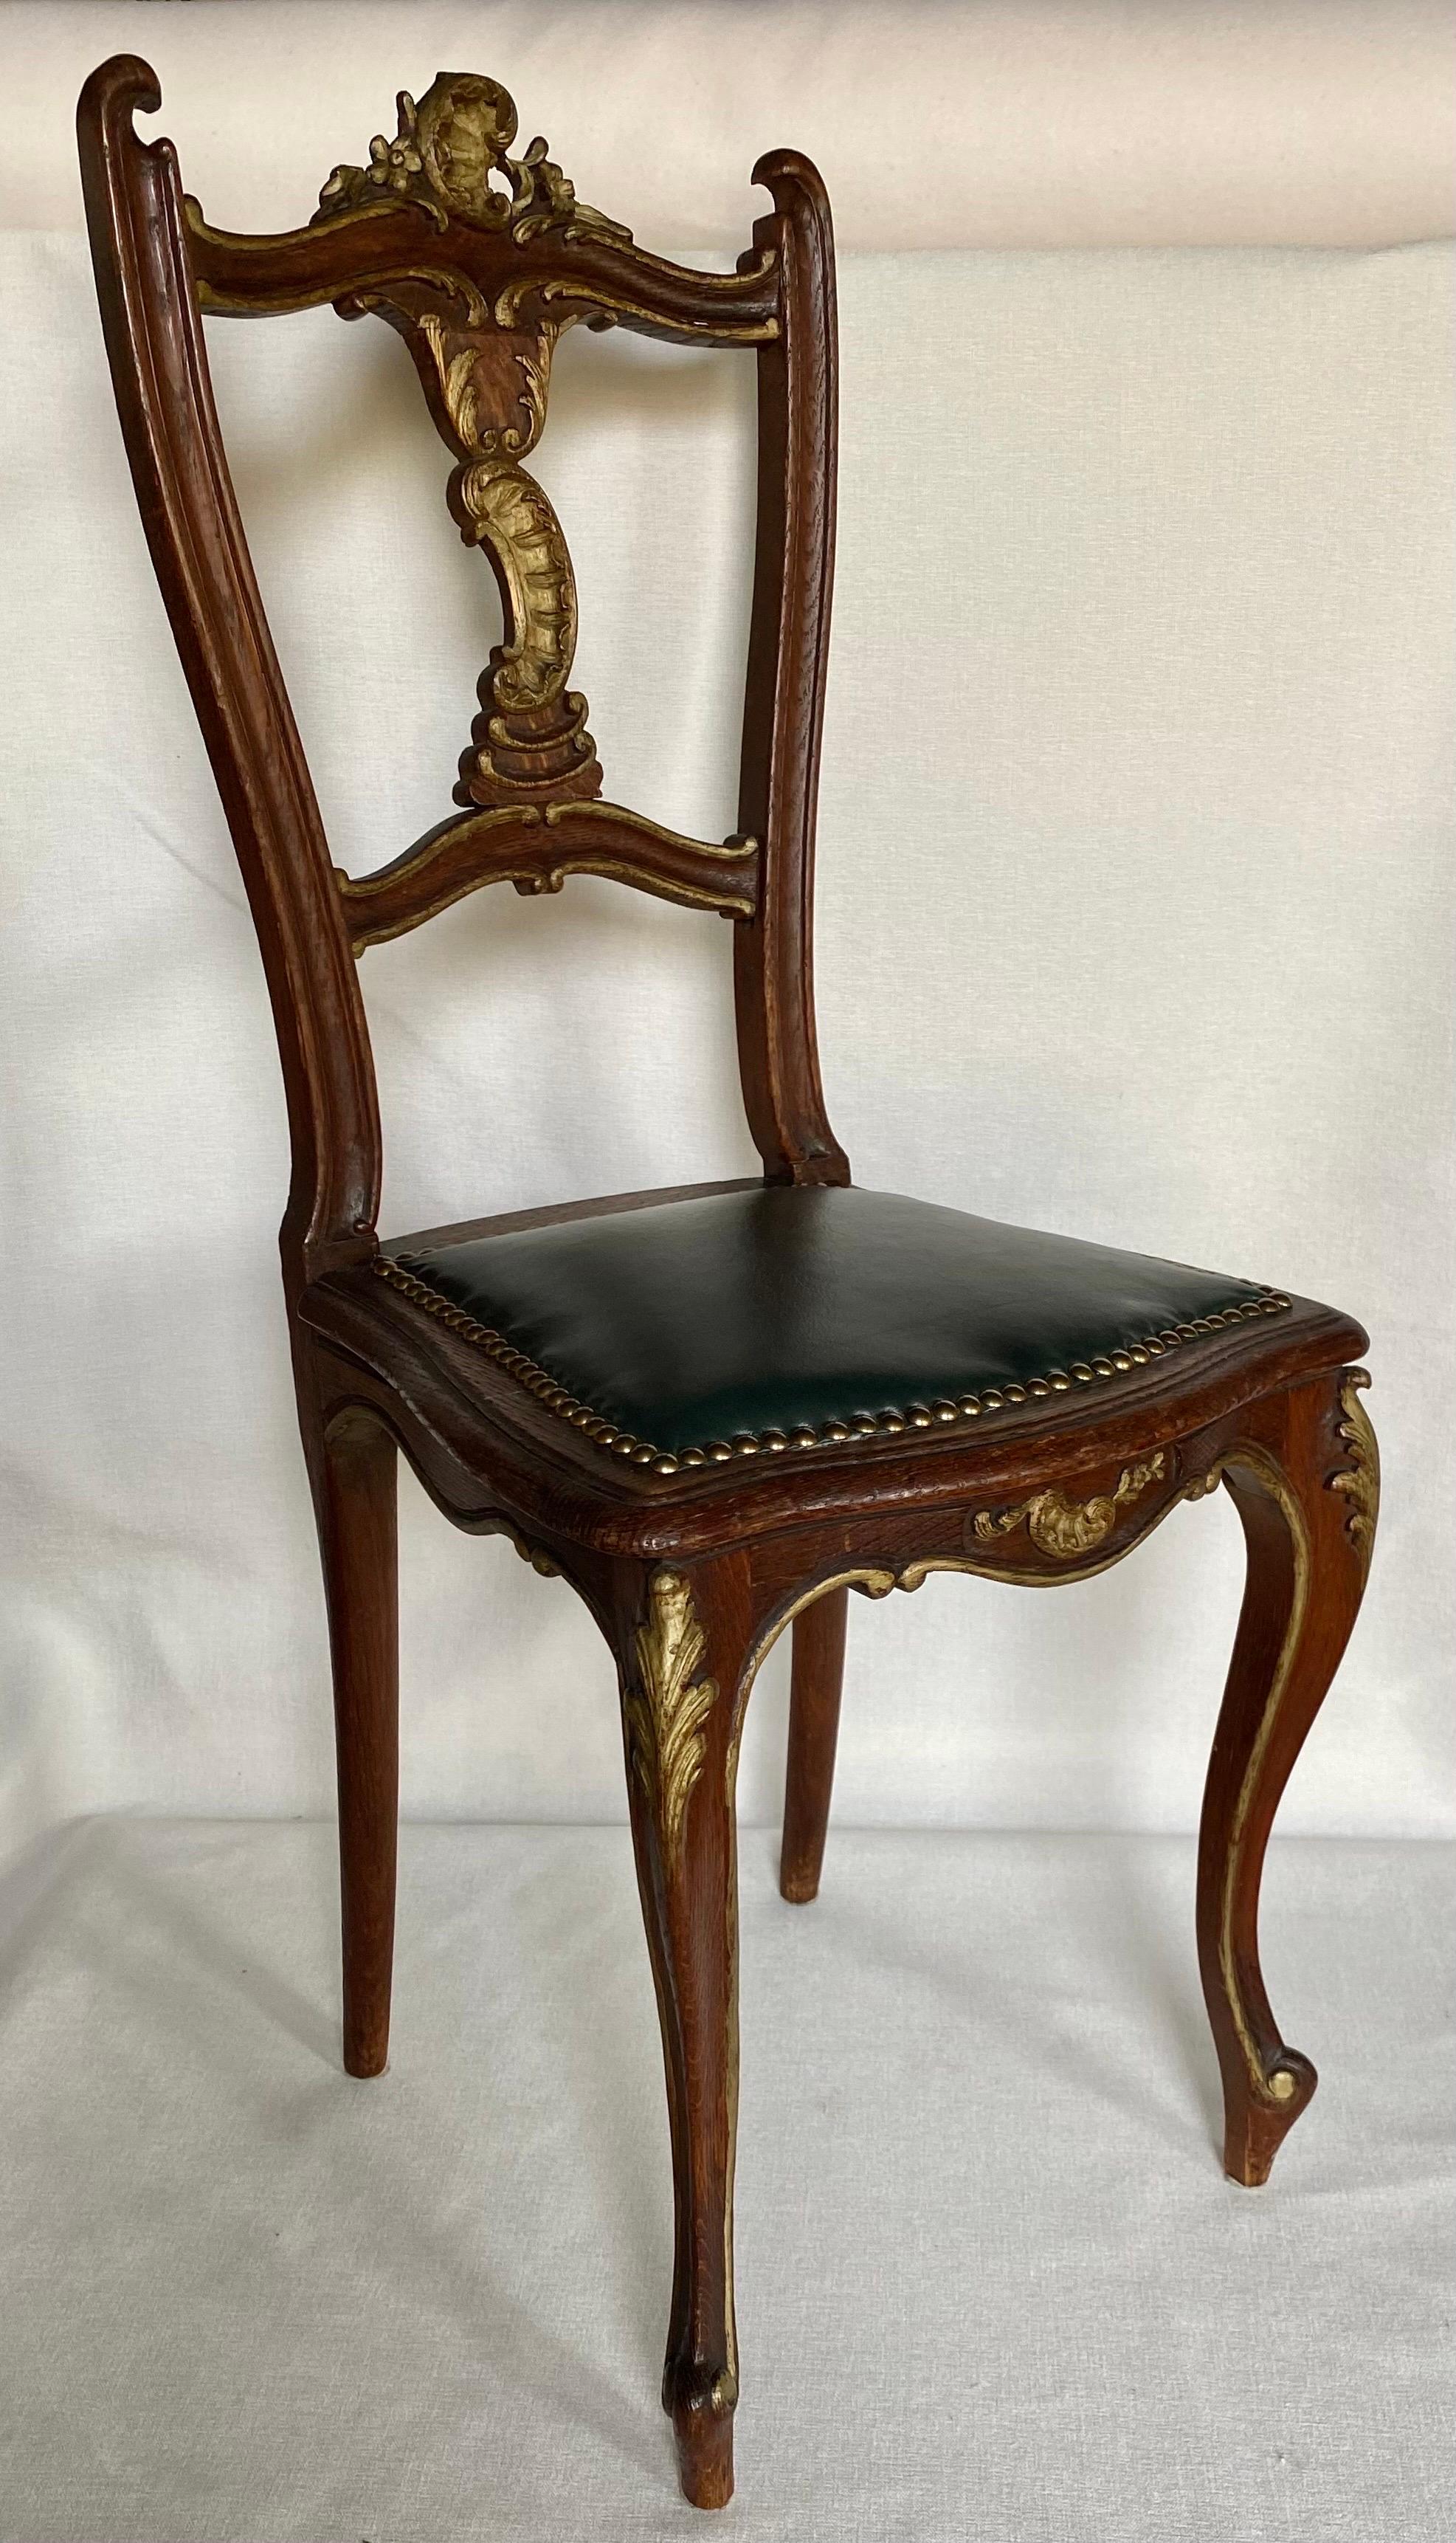 Louis XV style side chair with carved scrolled gilt accents and curved cabriole legs. This highly decorated small accent chair is upholstered in dark green leather and trimmed in brass nail heads. Would make a fabulous desk chair or could be